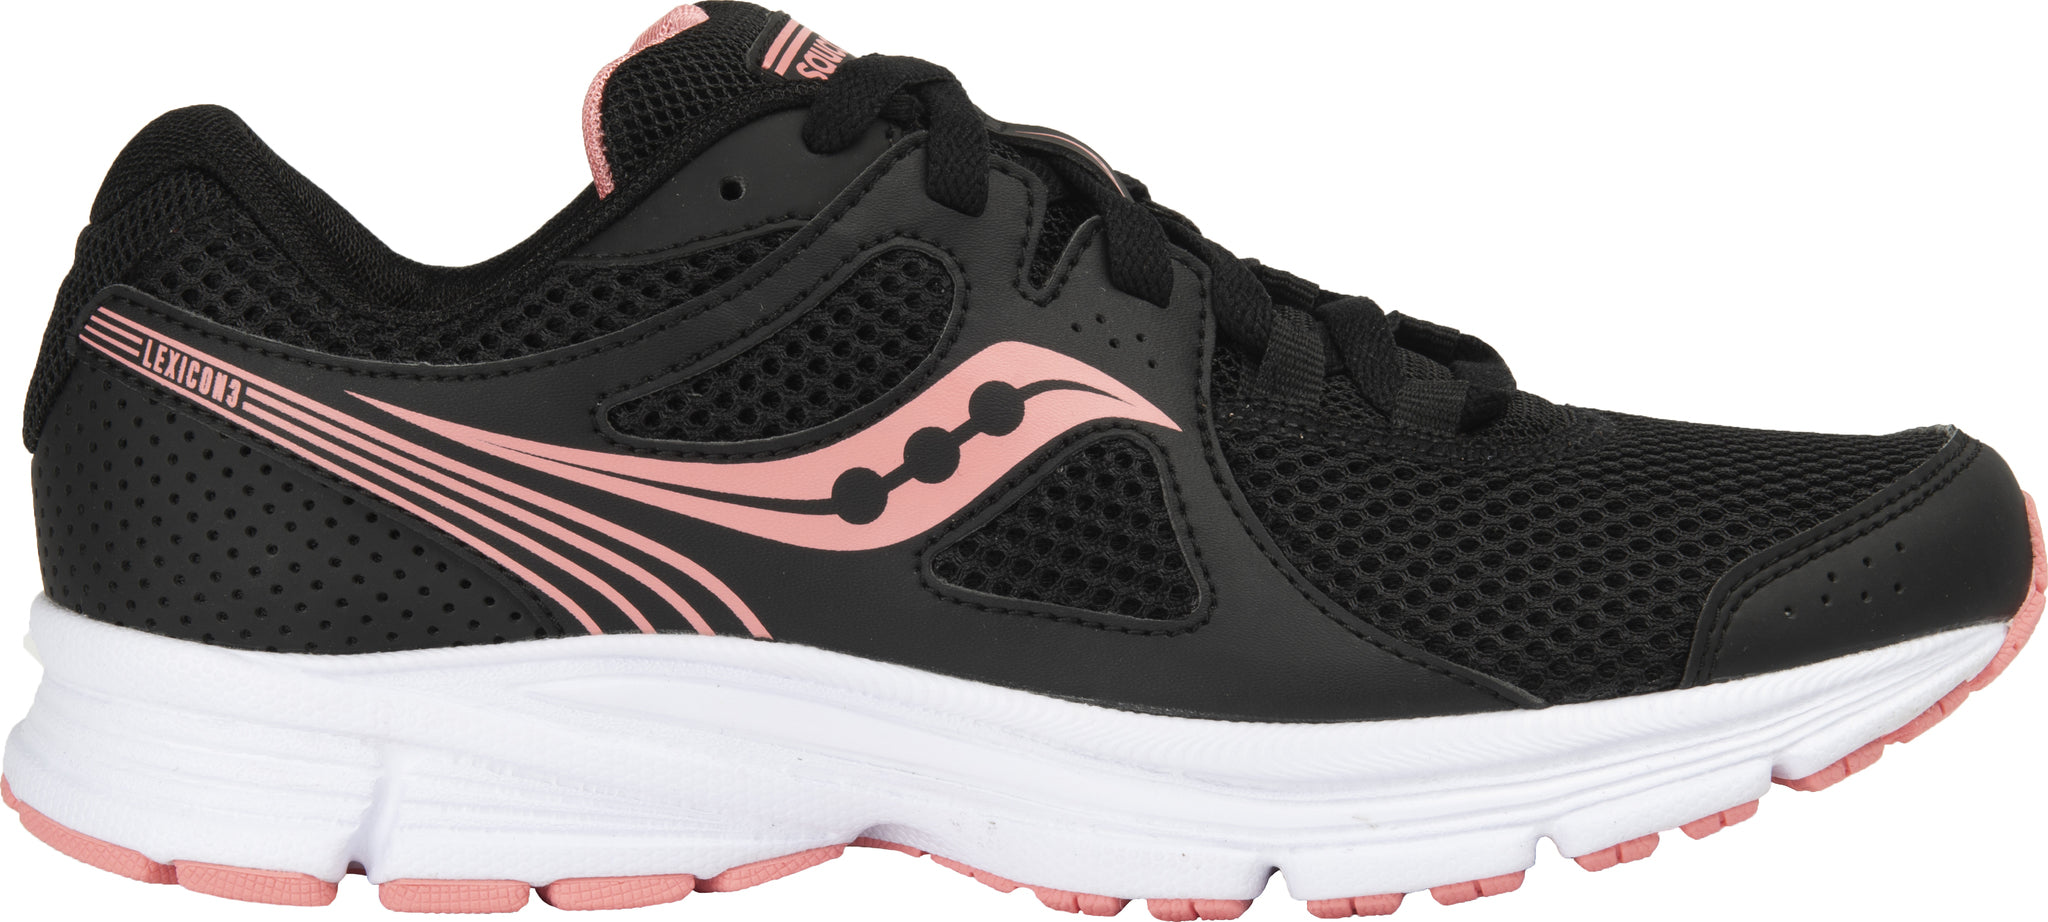 Saucony Lexicon 3 Running Shoes - Women 